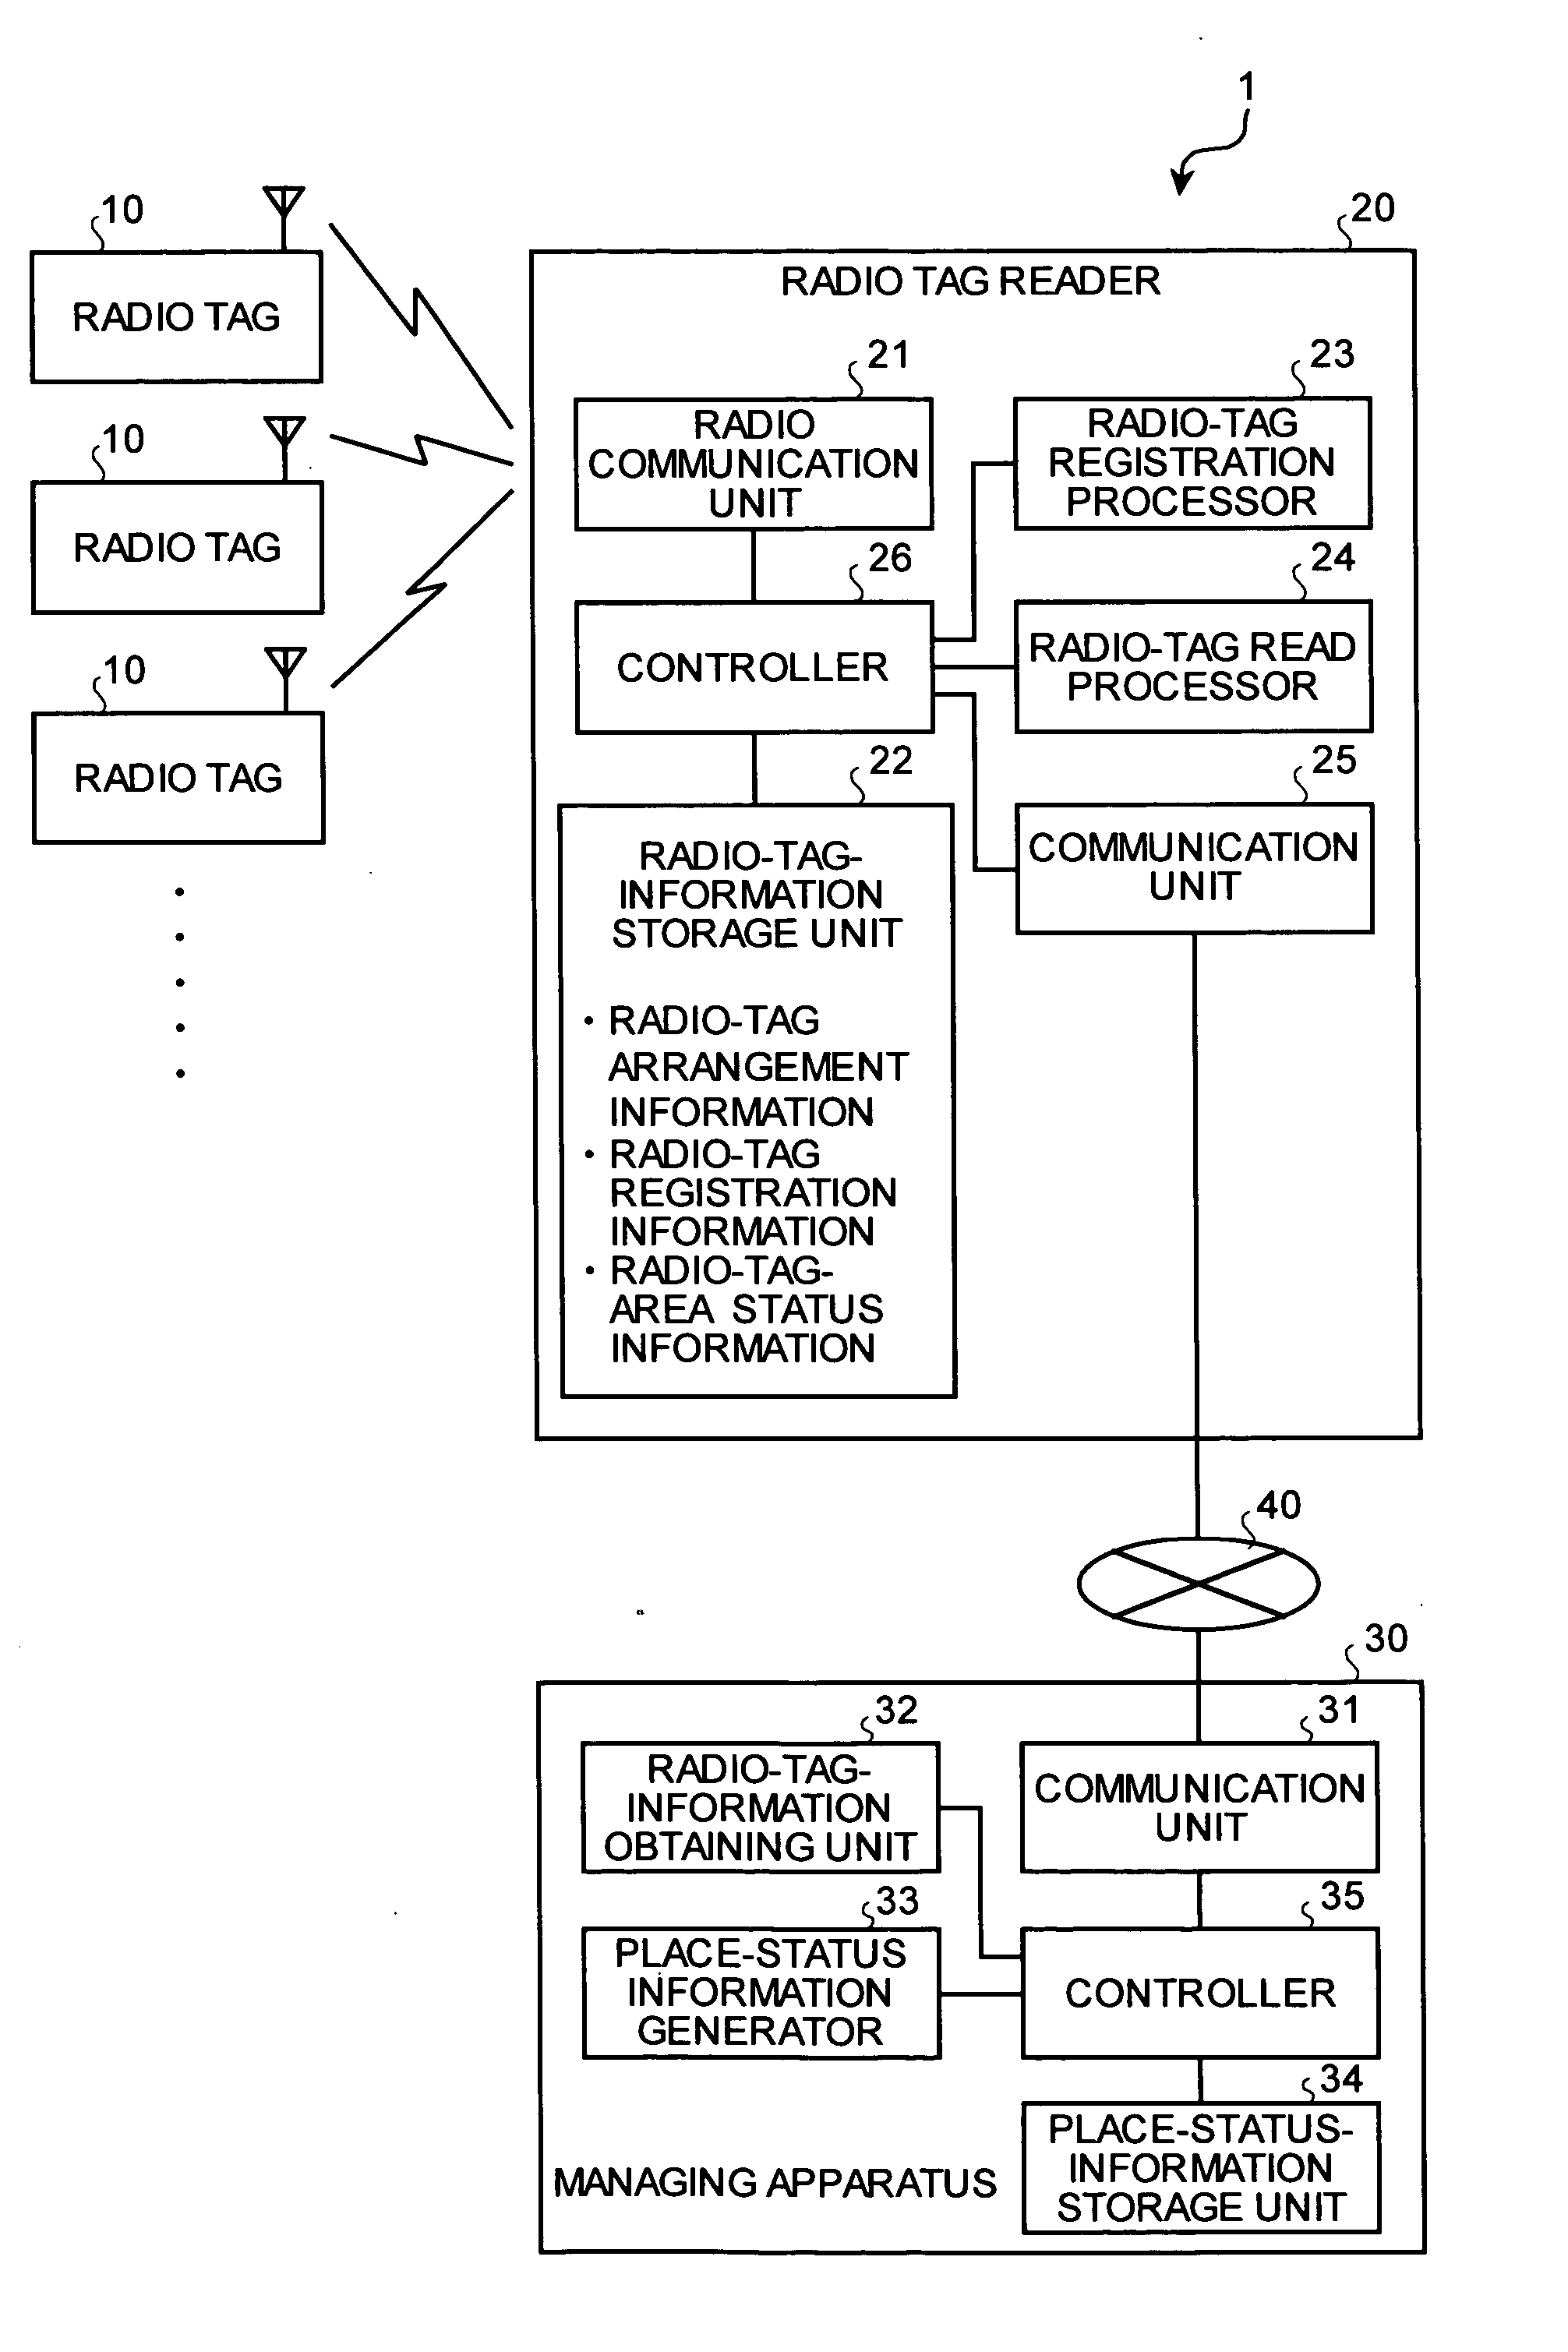 Place-Status Management System, Radio Tag Reader, and Managing Apparatus